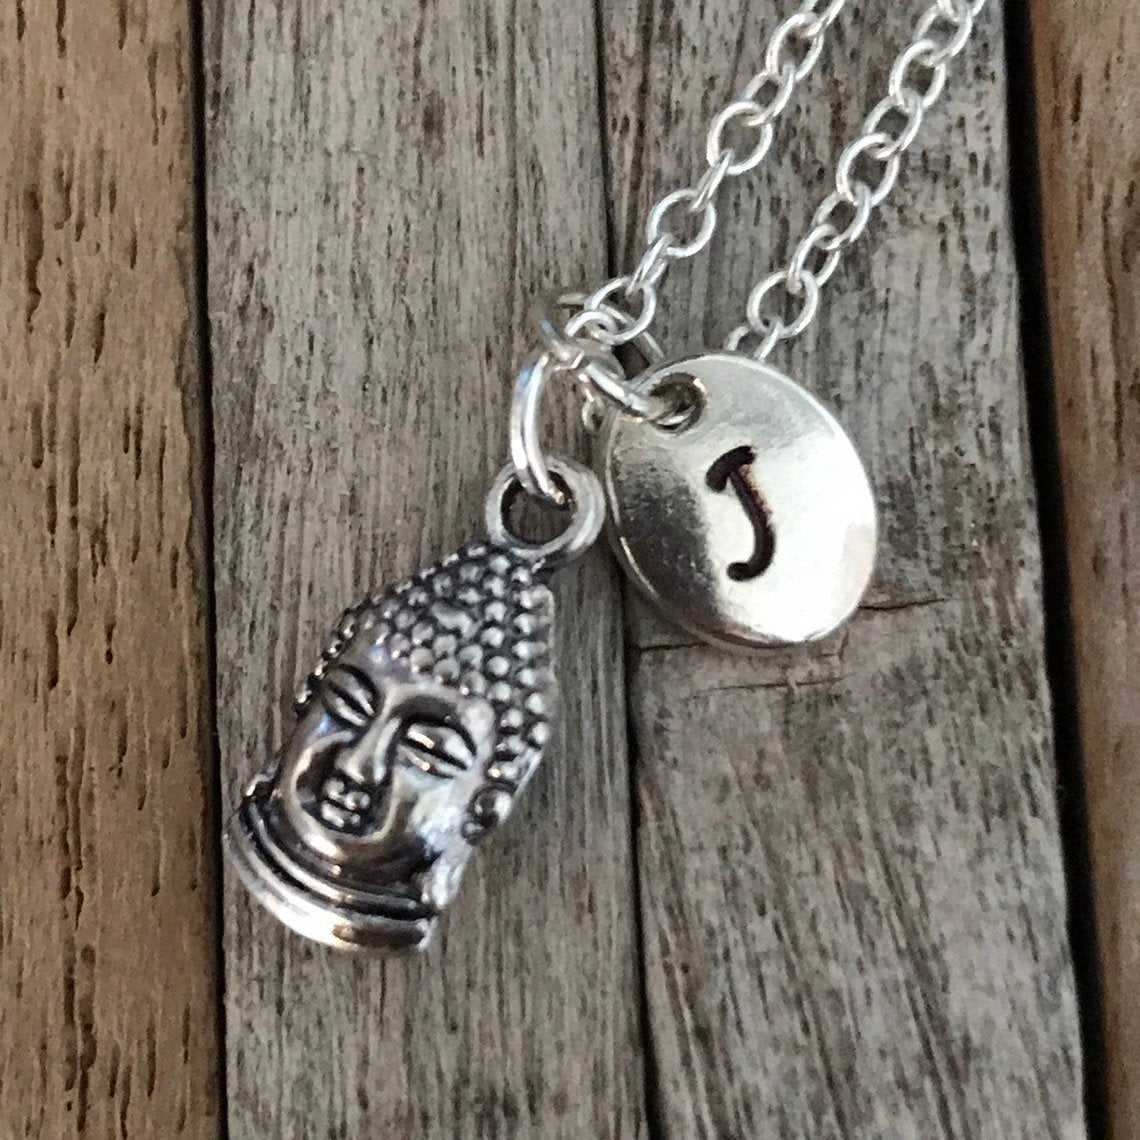 Buddha or Buddah necklace with initial charm